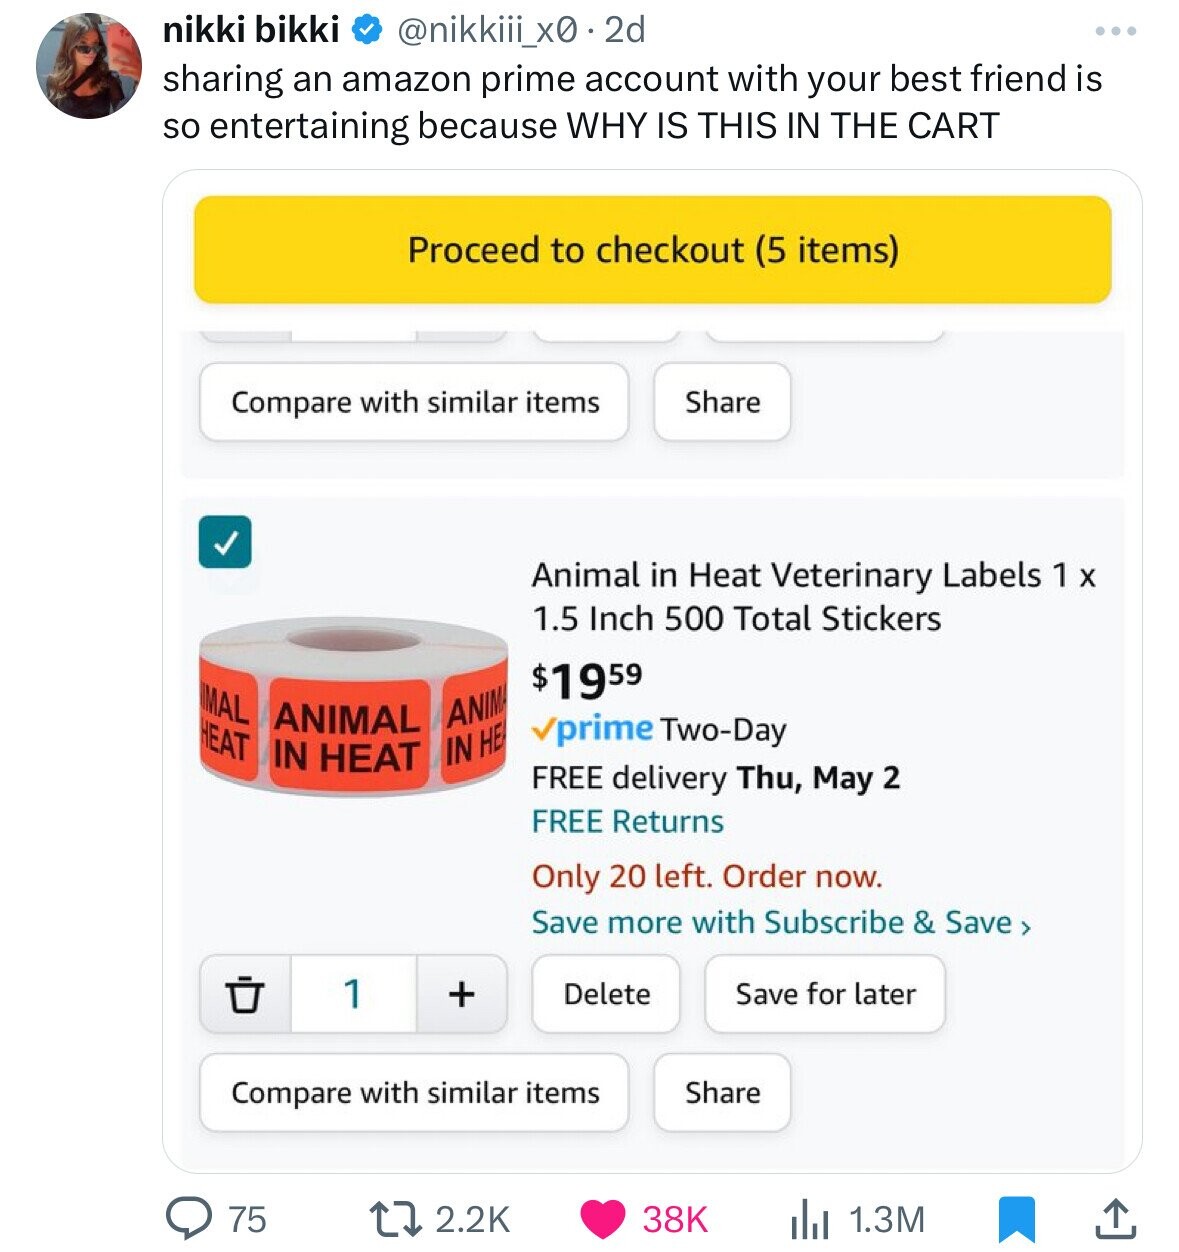 screenshot - nikki bikki 2d sharing an amazon prime account with your best friend is so entertaining because Why Is This In The Cart Proceed to checkout 5 items Compare with similar items ems Sh > Mal Animal Anima Animal in Heat Veterinary Labels 1 x 1.5 